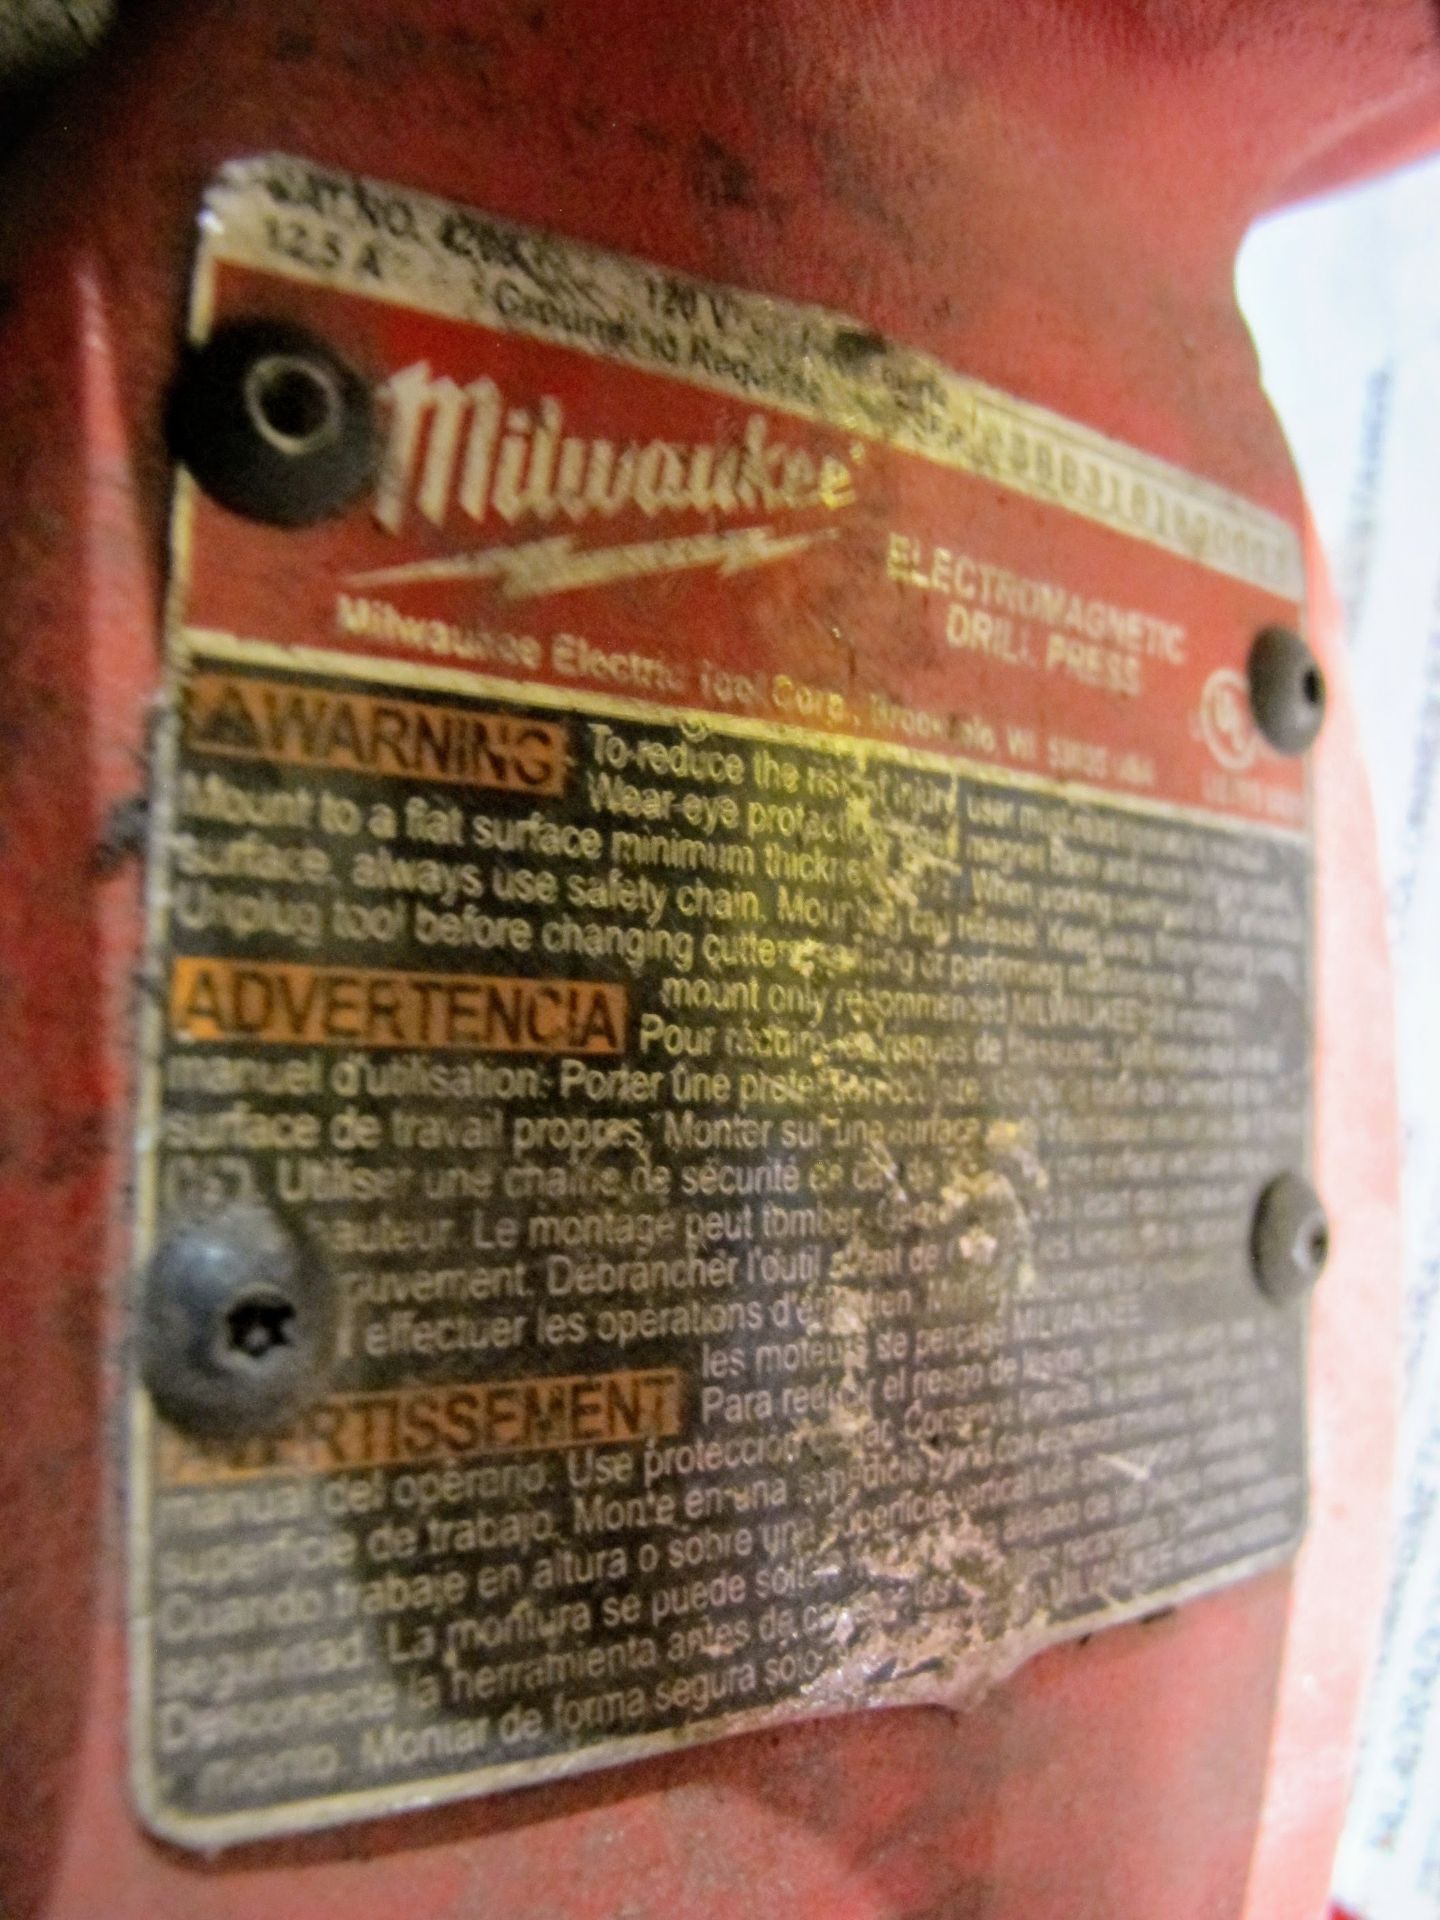 MILWAUKEE MAGNETIC DRILL MODEL 4205 - Image 3 of 3